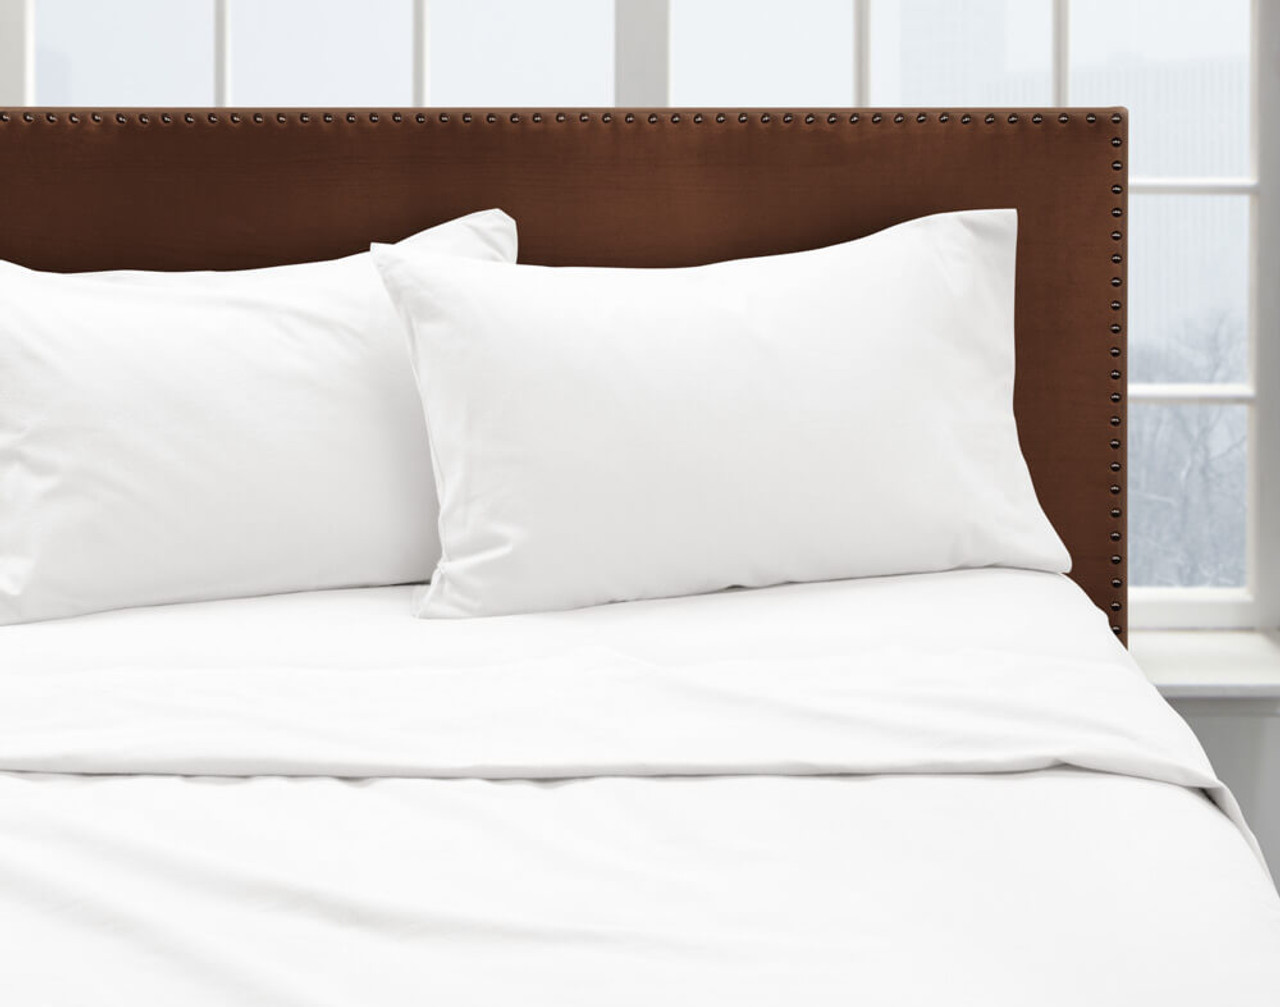 Our White Flannel Sheet Set dressed over a bed and pair of pillows.